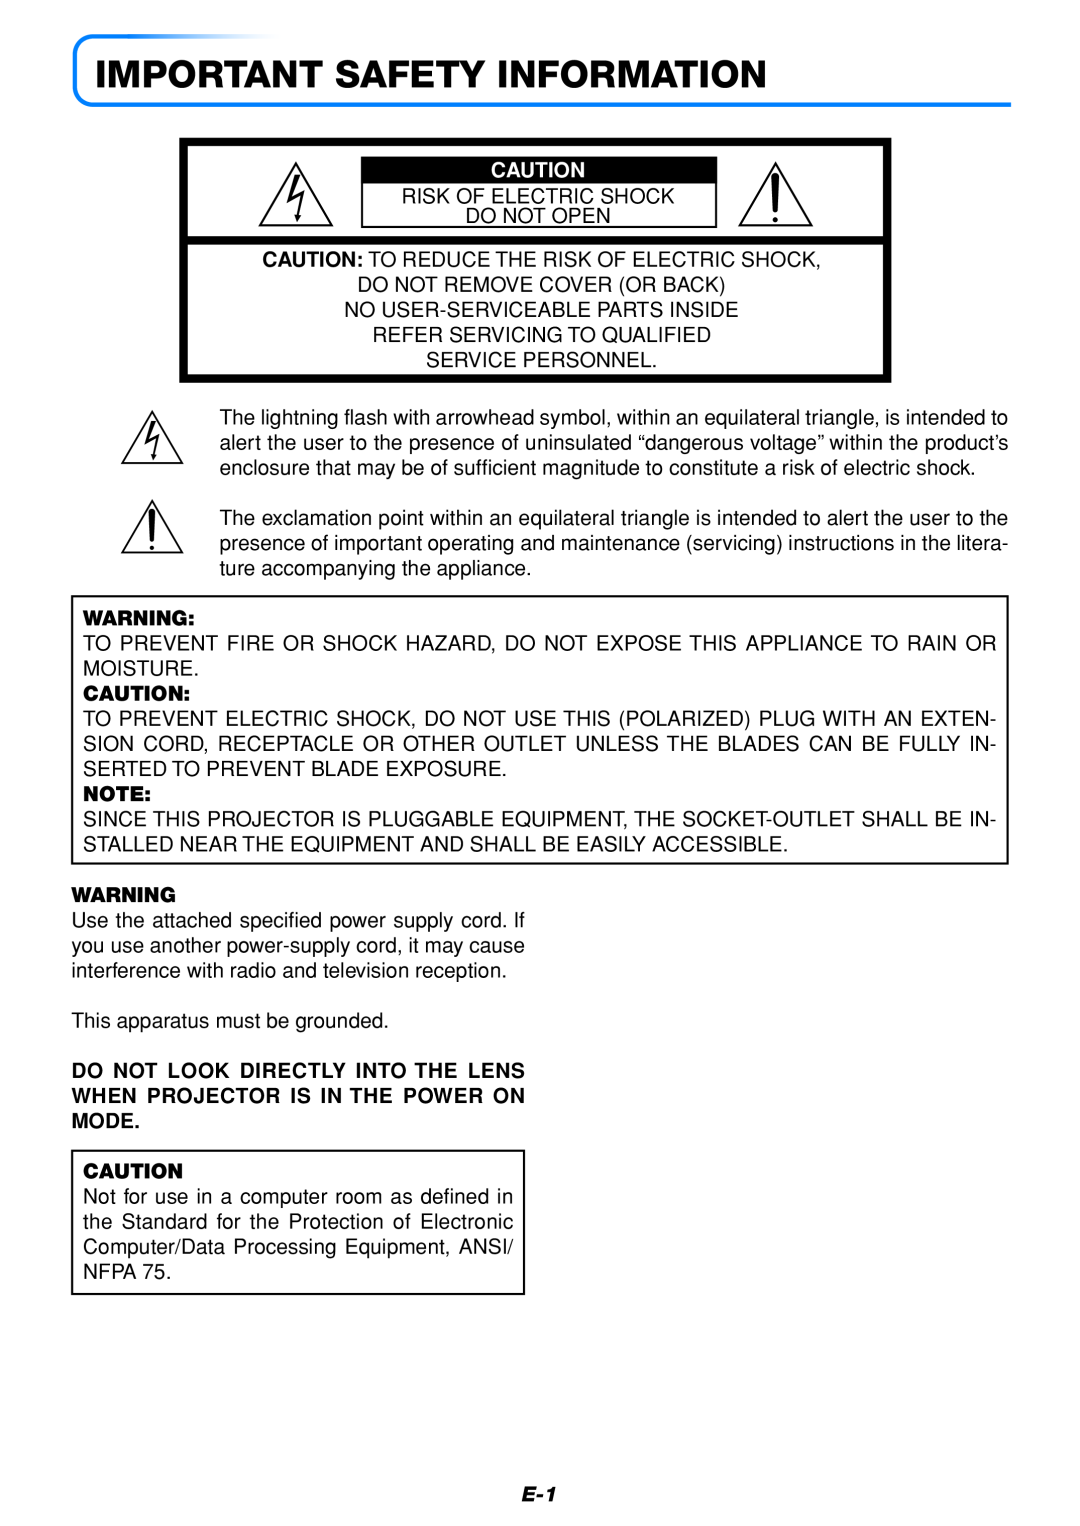 Mitsubishi Electronics DATA PROJECTOR user manual Important Safety Information, Mode 